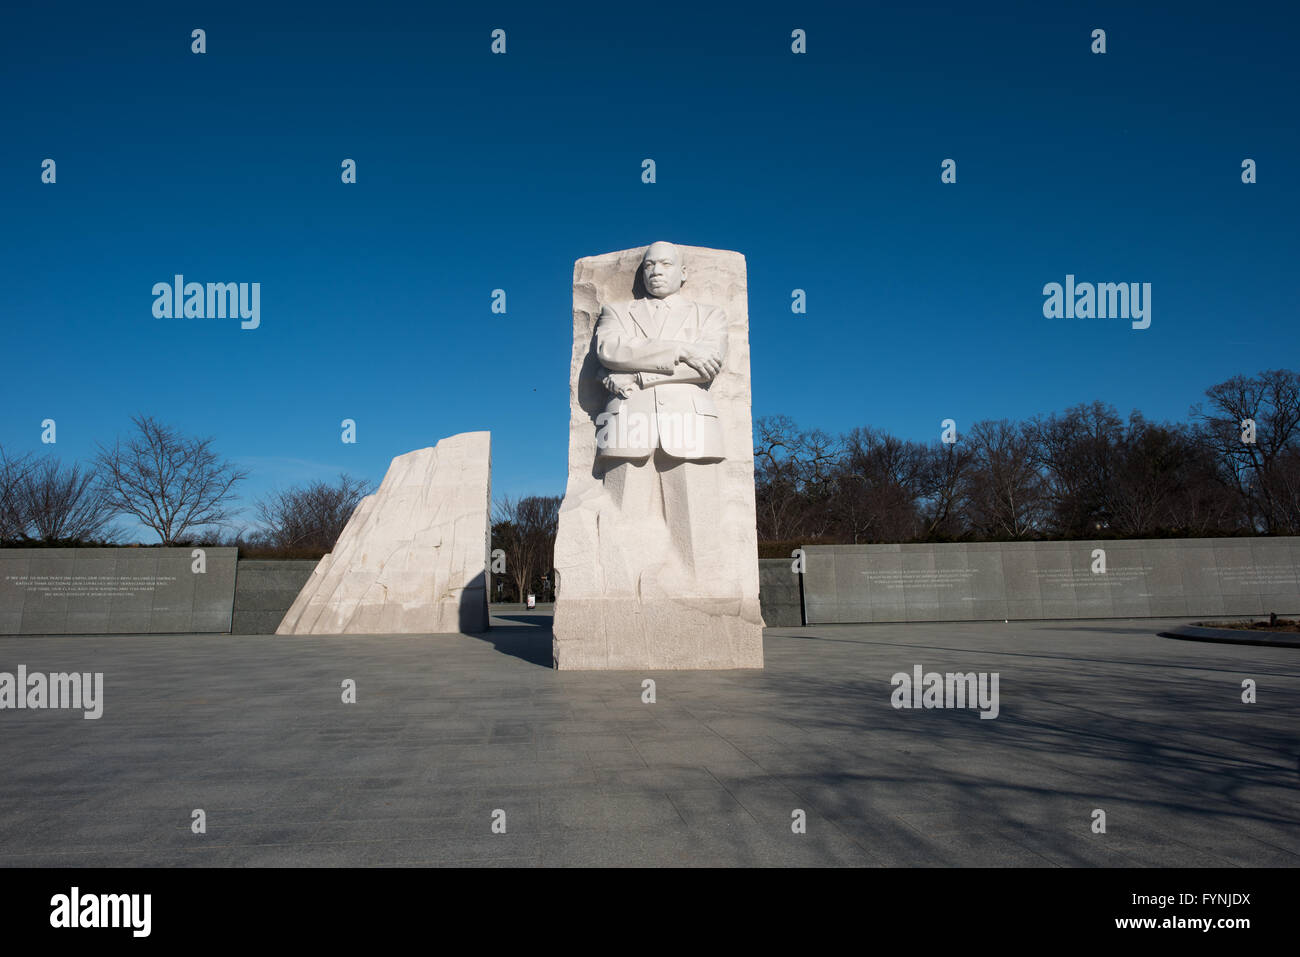 WASHINGTON DC, USA - Opened in 2011, the Martin Luther King, Jr. Memorial commemorates the Civil Rights leader and the Civil Rights movement. It stands on the banks of the Tidal Basin in Washington DC. Its centerpiece is a large statue of Dr. King that was carved by Lei Yixin. Stock Photo